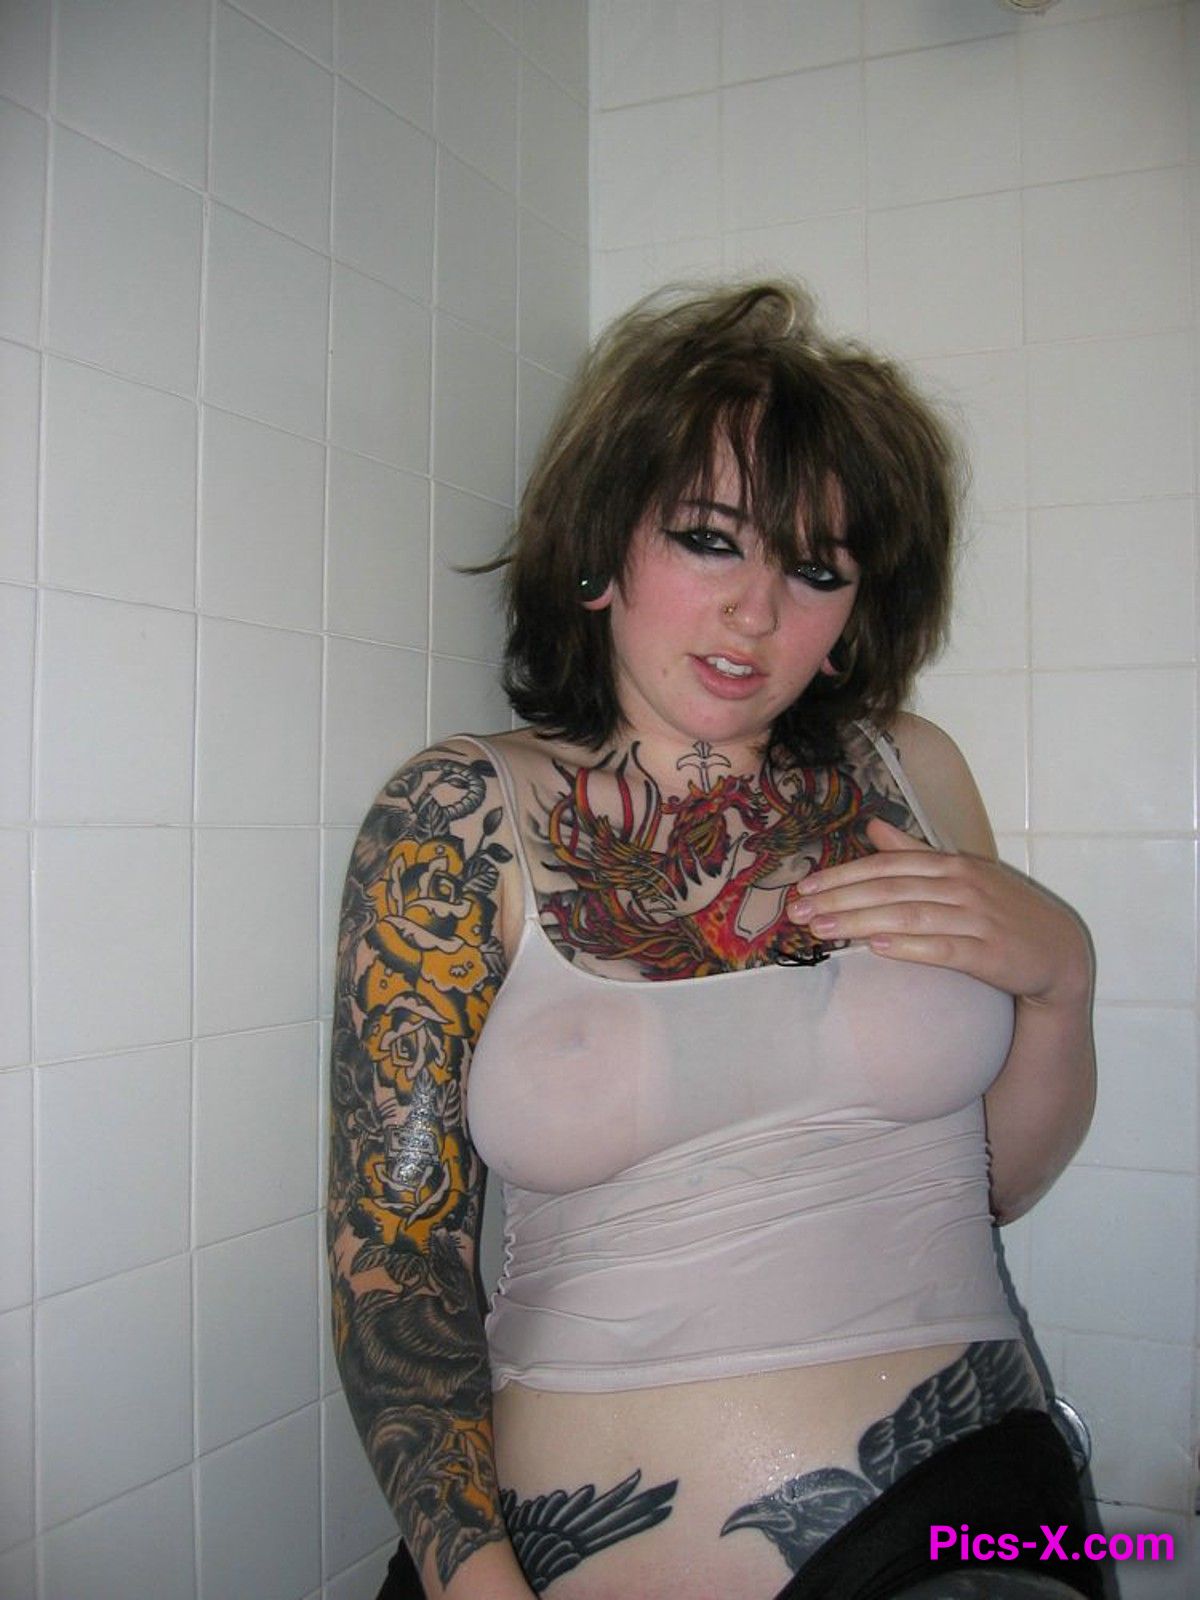 Tattooed girl with running makeup posing naked at home - Punk Rock Girlfriend - Image 8